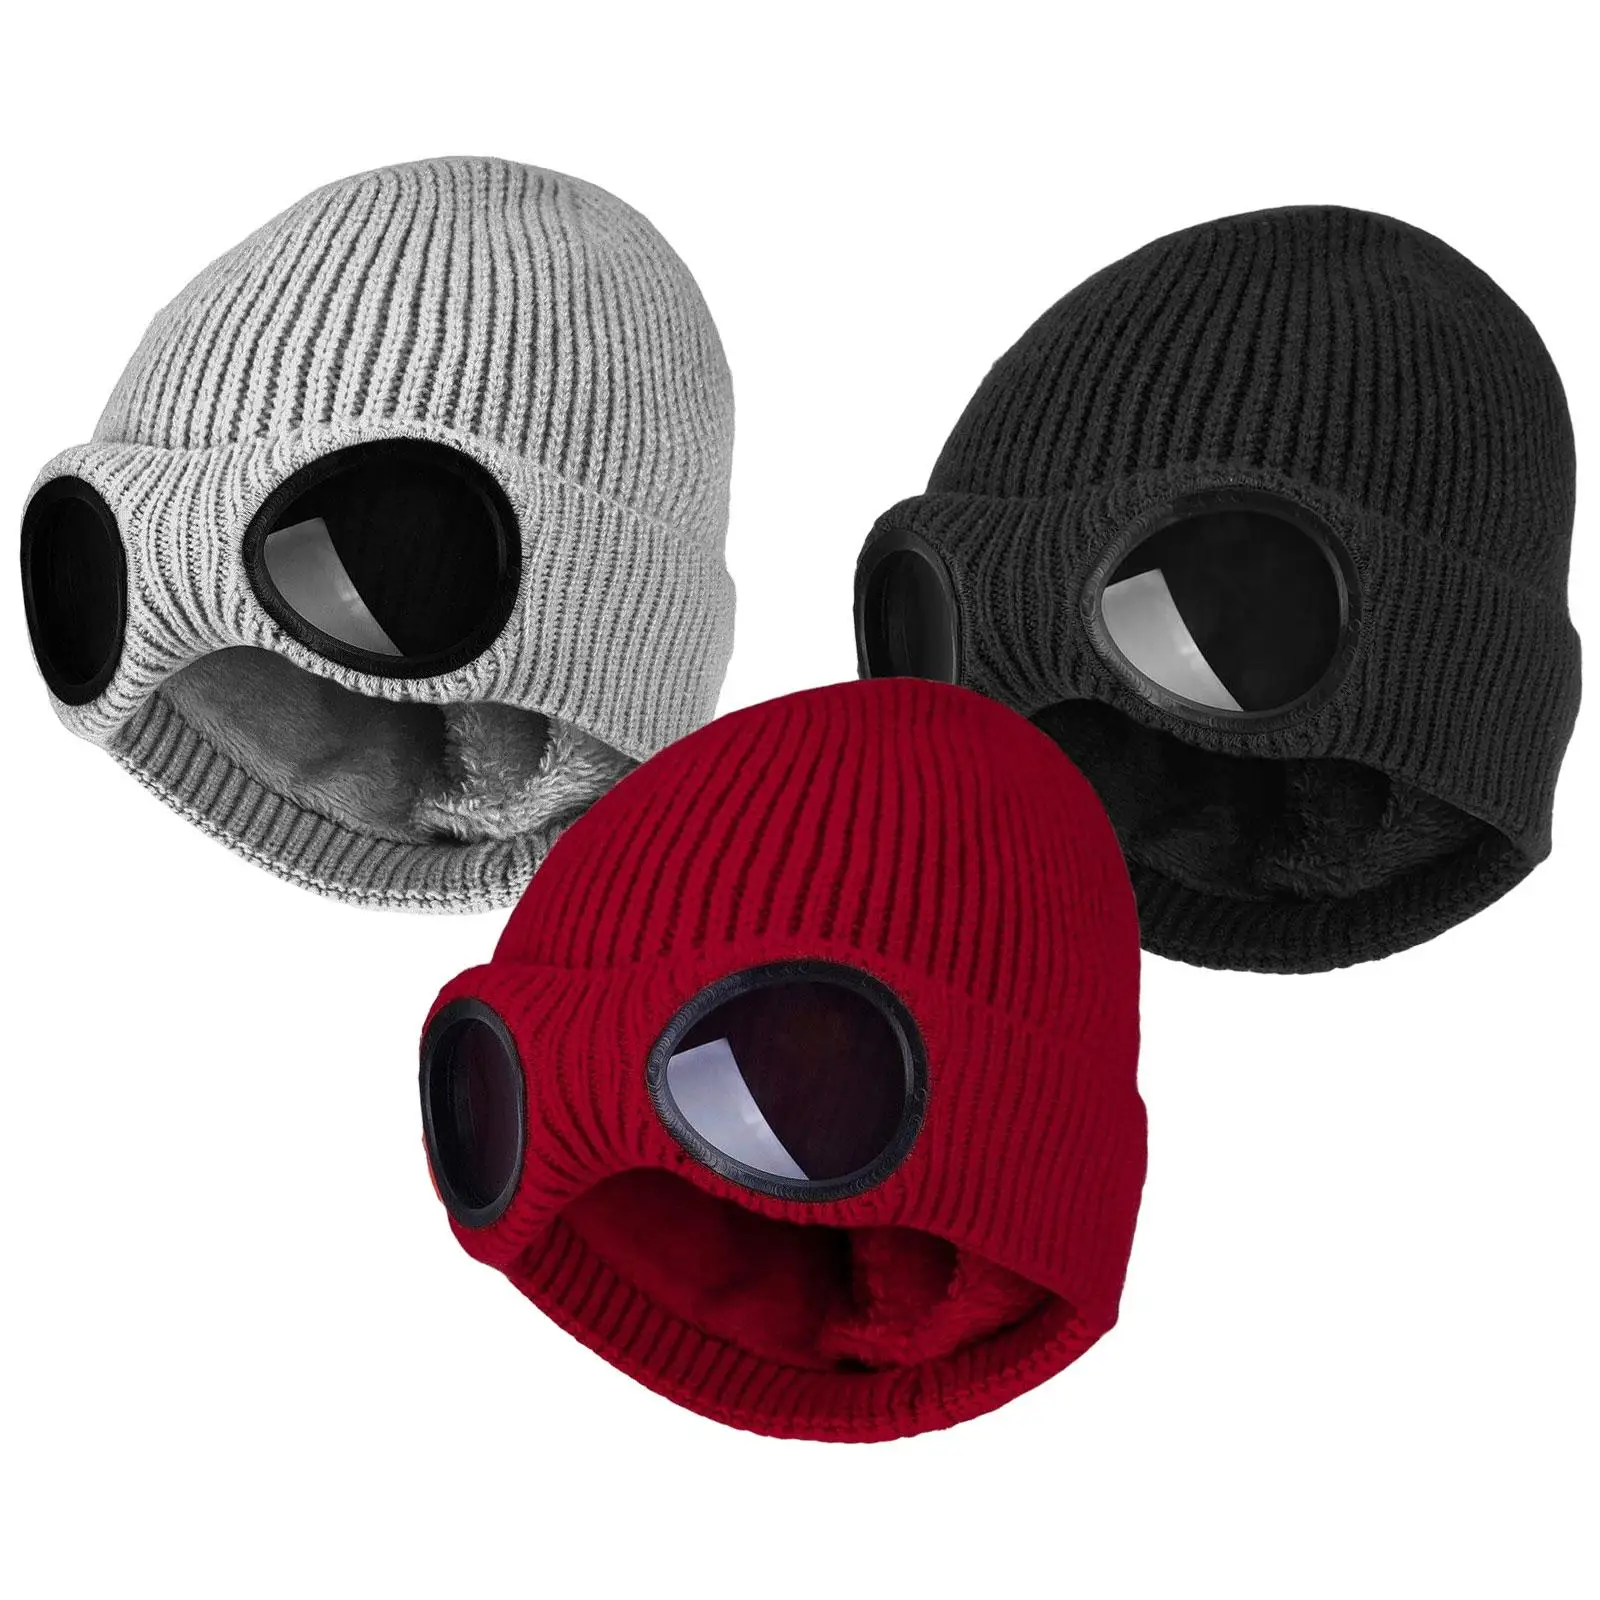 Casual Winter Warm Knit Hats Multi-Function Daily Caps Windproof Thermal Ski Caps for Men Women Unisex Outdoor Sports Running